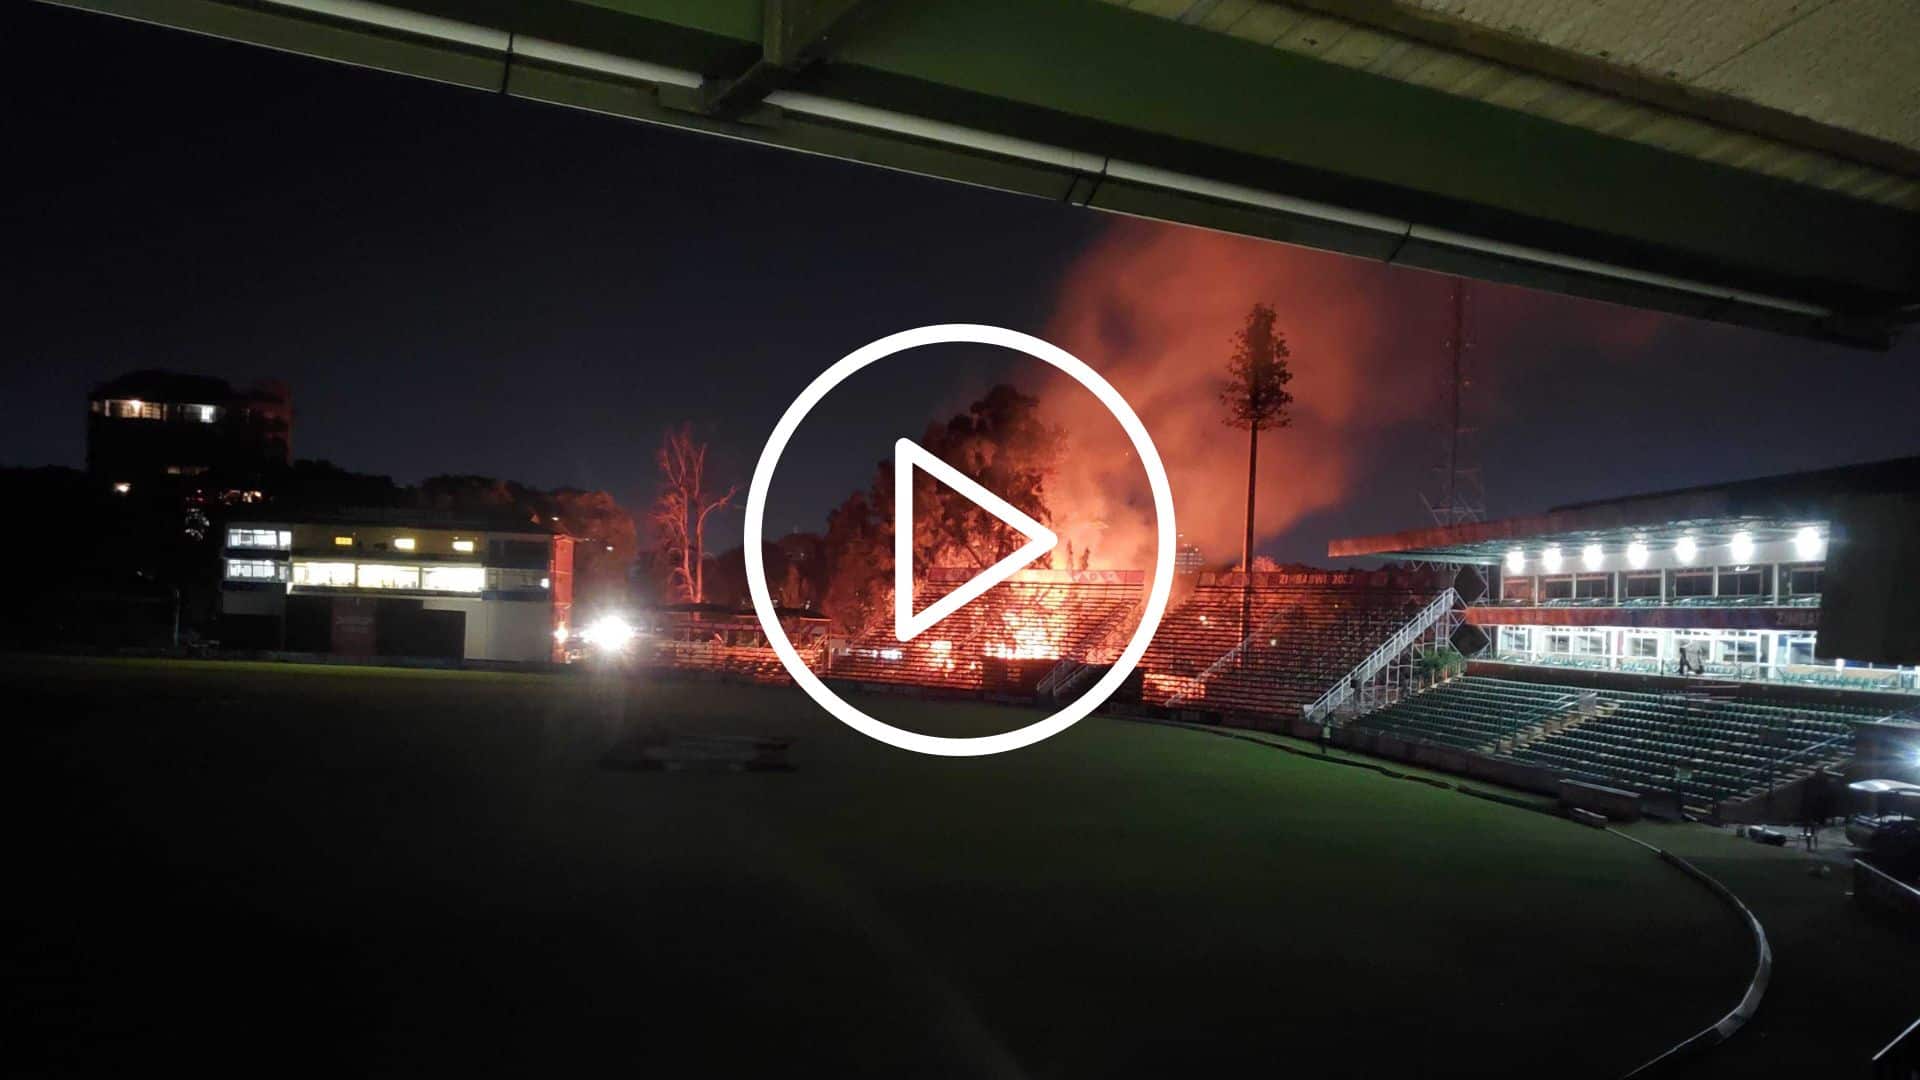 [Watch] Fire Broke at World Cup Qualifiers' Venue Harare After ZIM vs NED